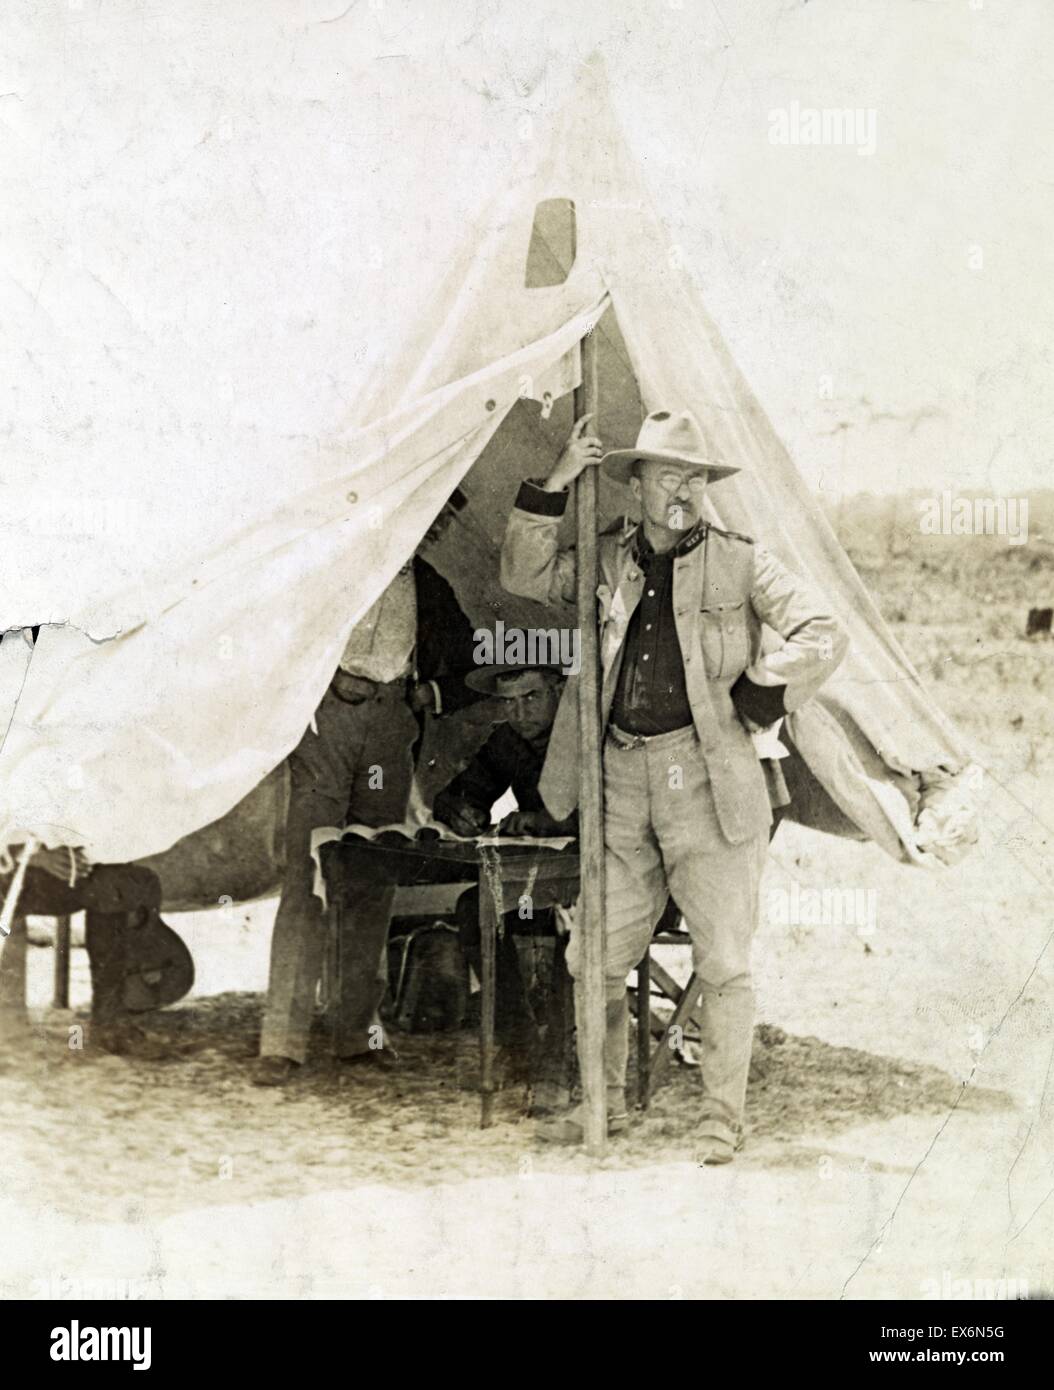 Photographic print of Theodore Roosevelt (1858-1919) as a rough rider, at Camp Wikoff standing in front of tent with two unidentified men behind him Tampa, Florida. Photographed by Underwood & Underwood Photography. Dated 1898 Stock Photo